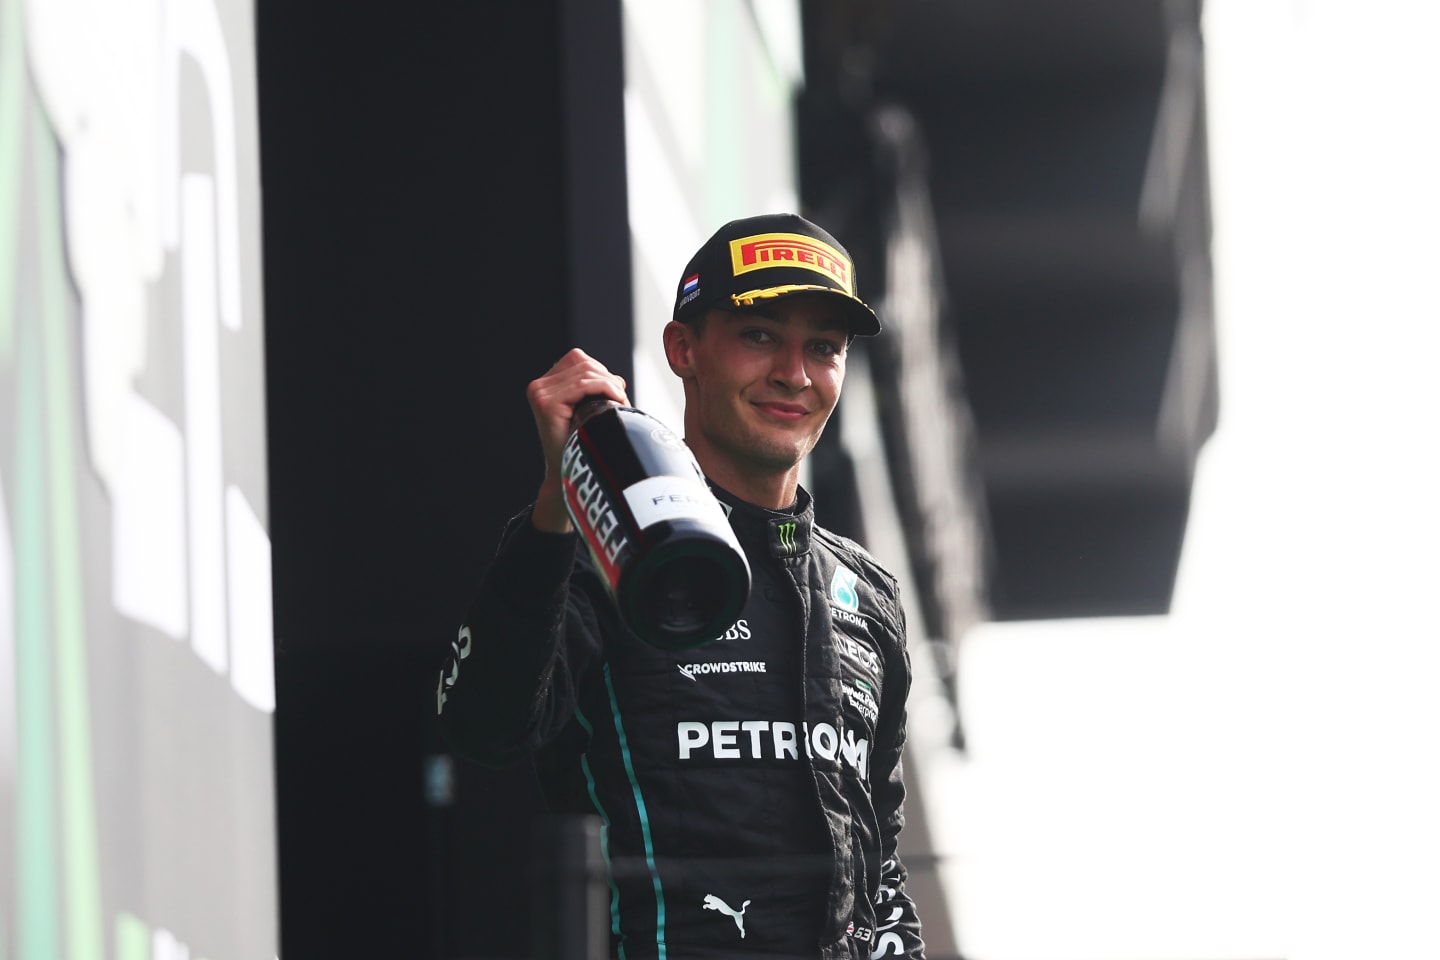 ZANDVOORT, NETHERLANDS - SEPTEMBER 04: Second placed George Russell of Great Britain and Mercedes celebrates on the podium during the F1 Grand Prix of The Netherlands at Circuit Zandvoort on September 04, 2022 in Zandvoort, Netherlands. (Photo by Lars Baron - Formula 1/Formula 1 via Getty Images)